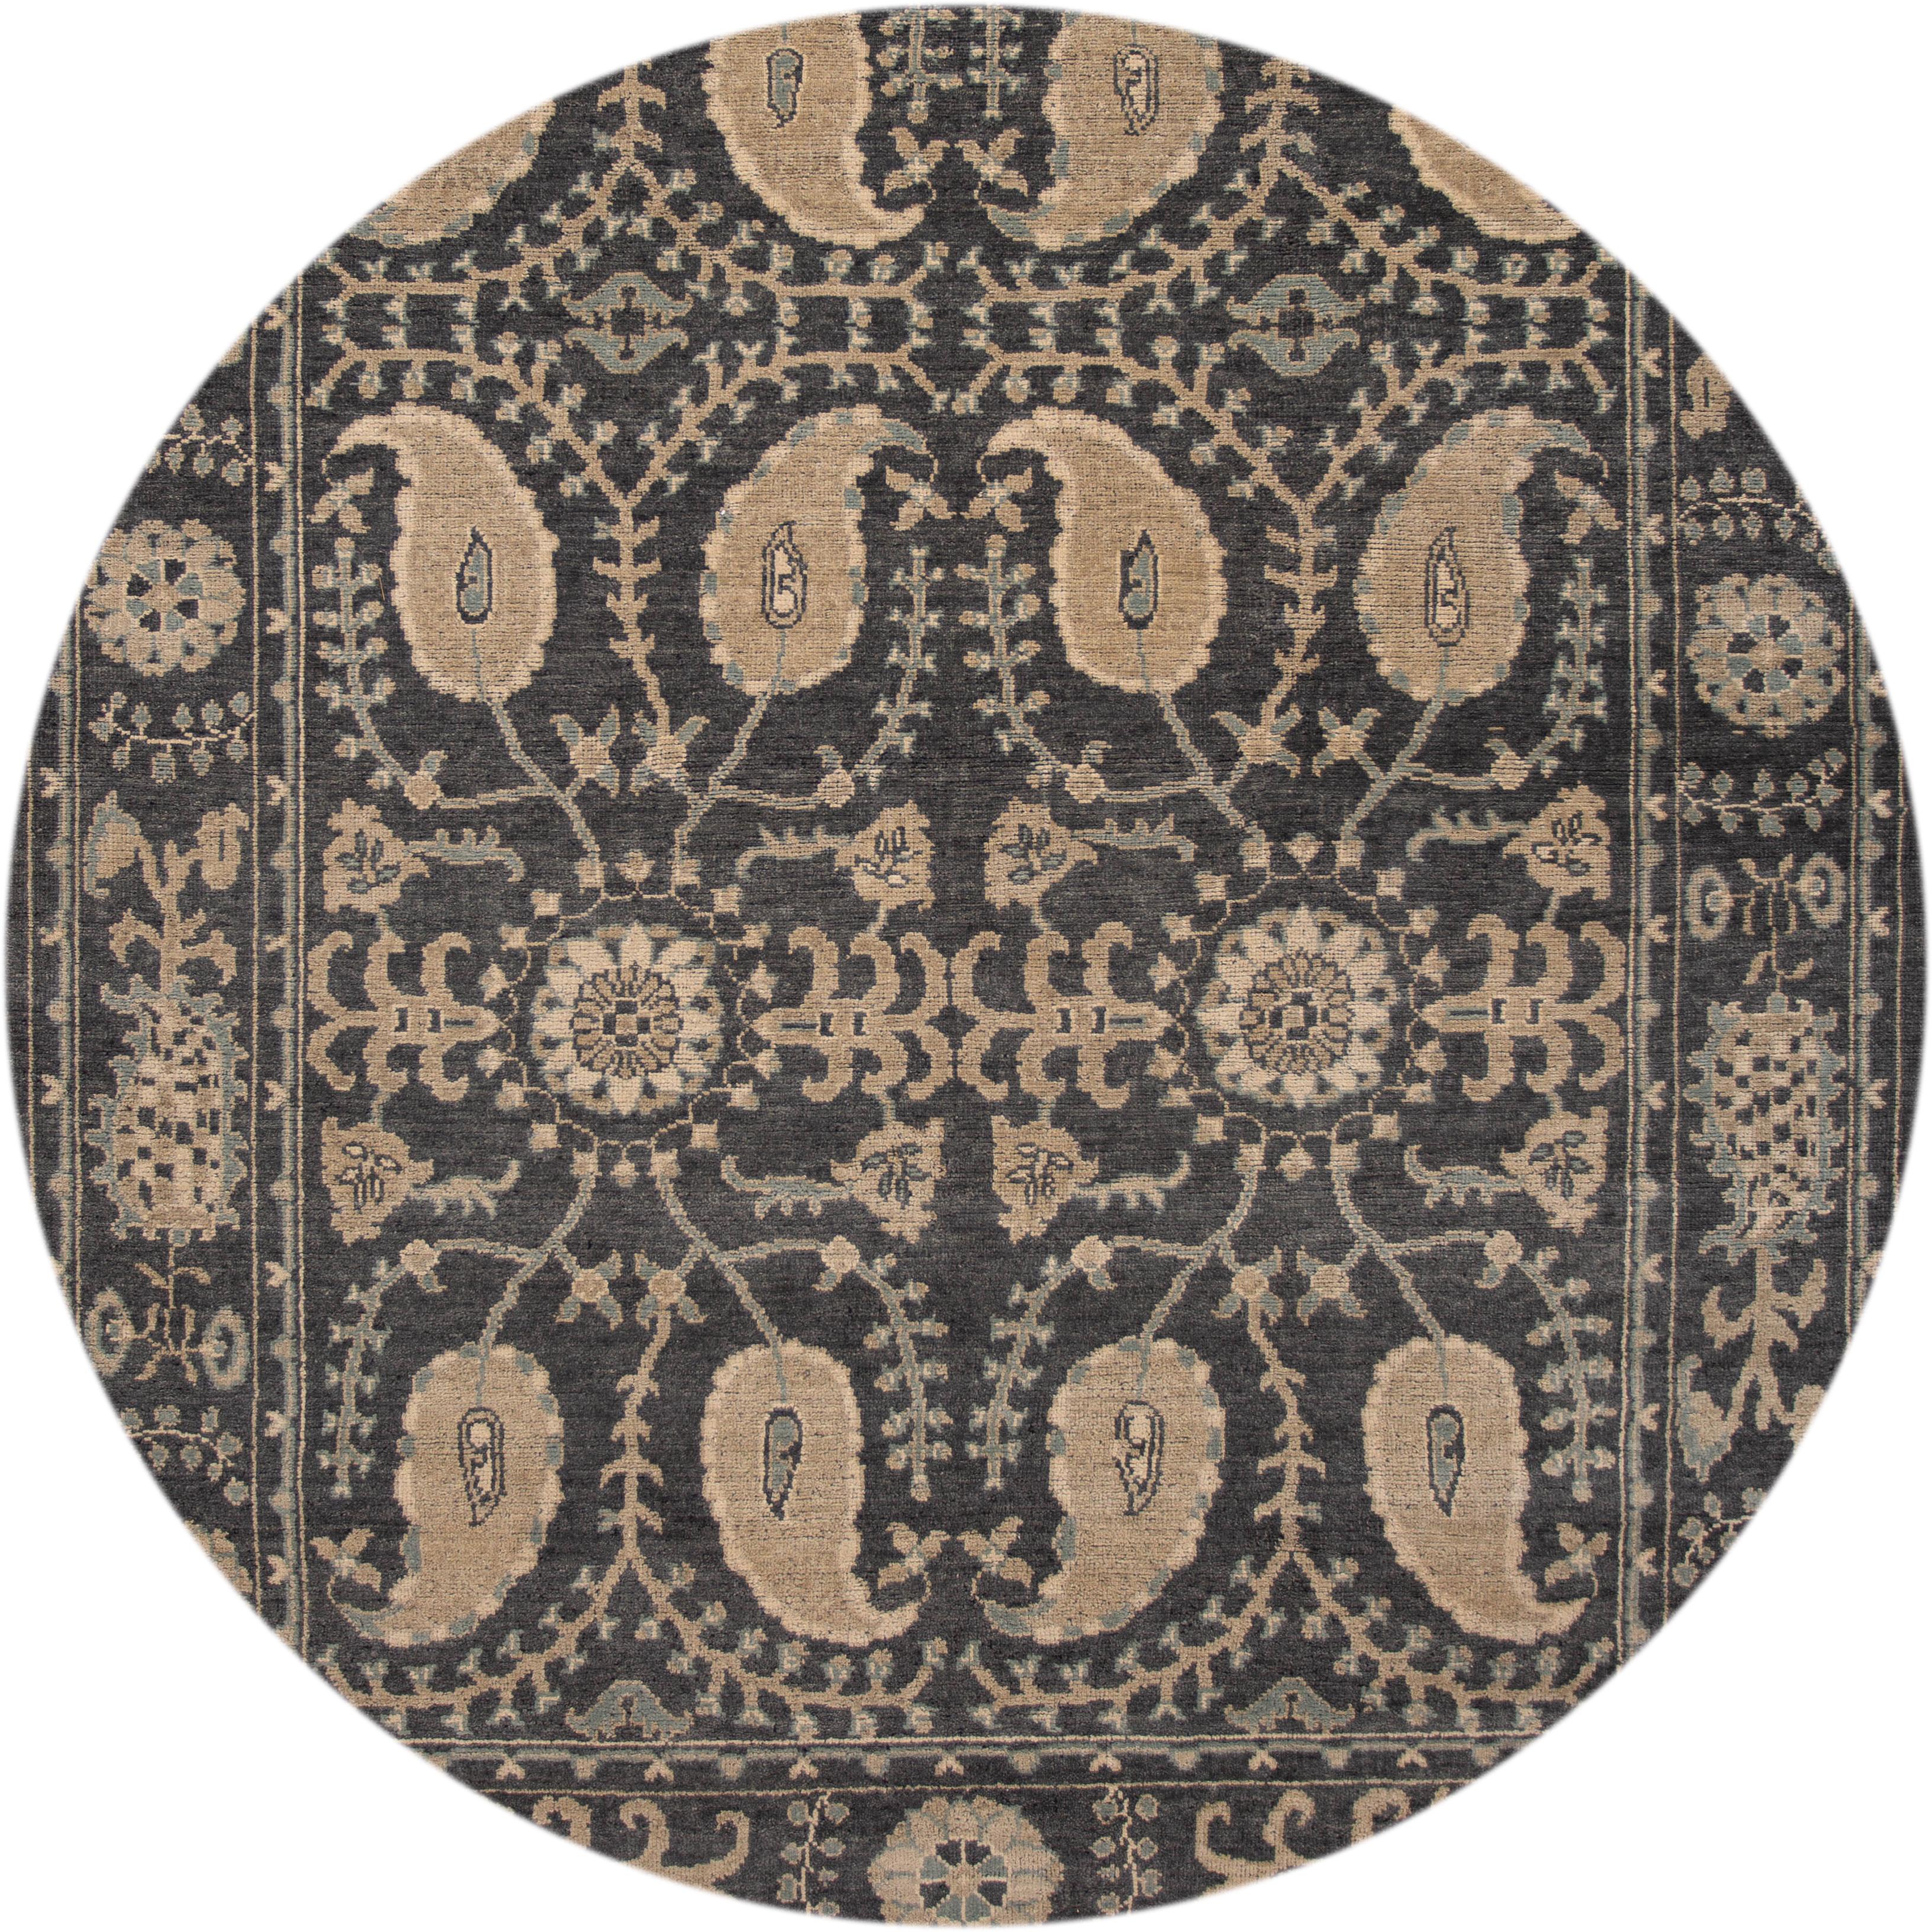 Beautiful contemporary Oushak rug, hand knotted wool with a dark gray field, ivory and tan accents in an all-over Classic motif,
circa 2019
This rug measures 9' 1